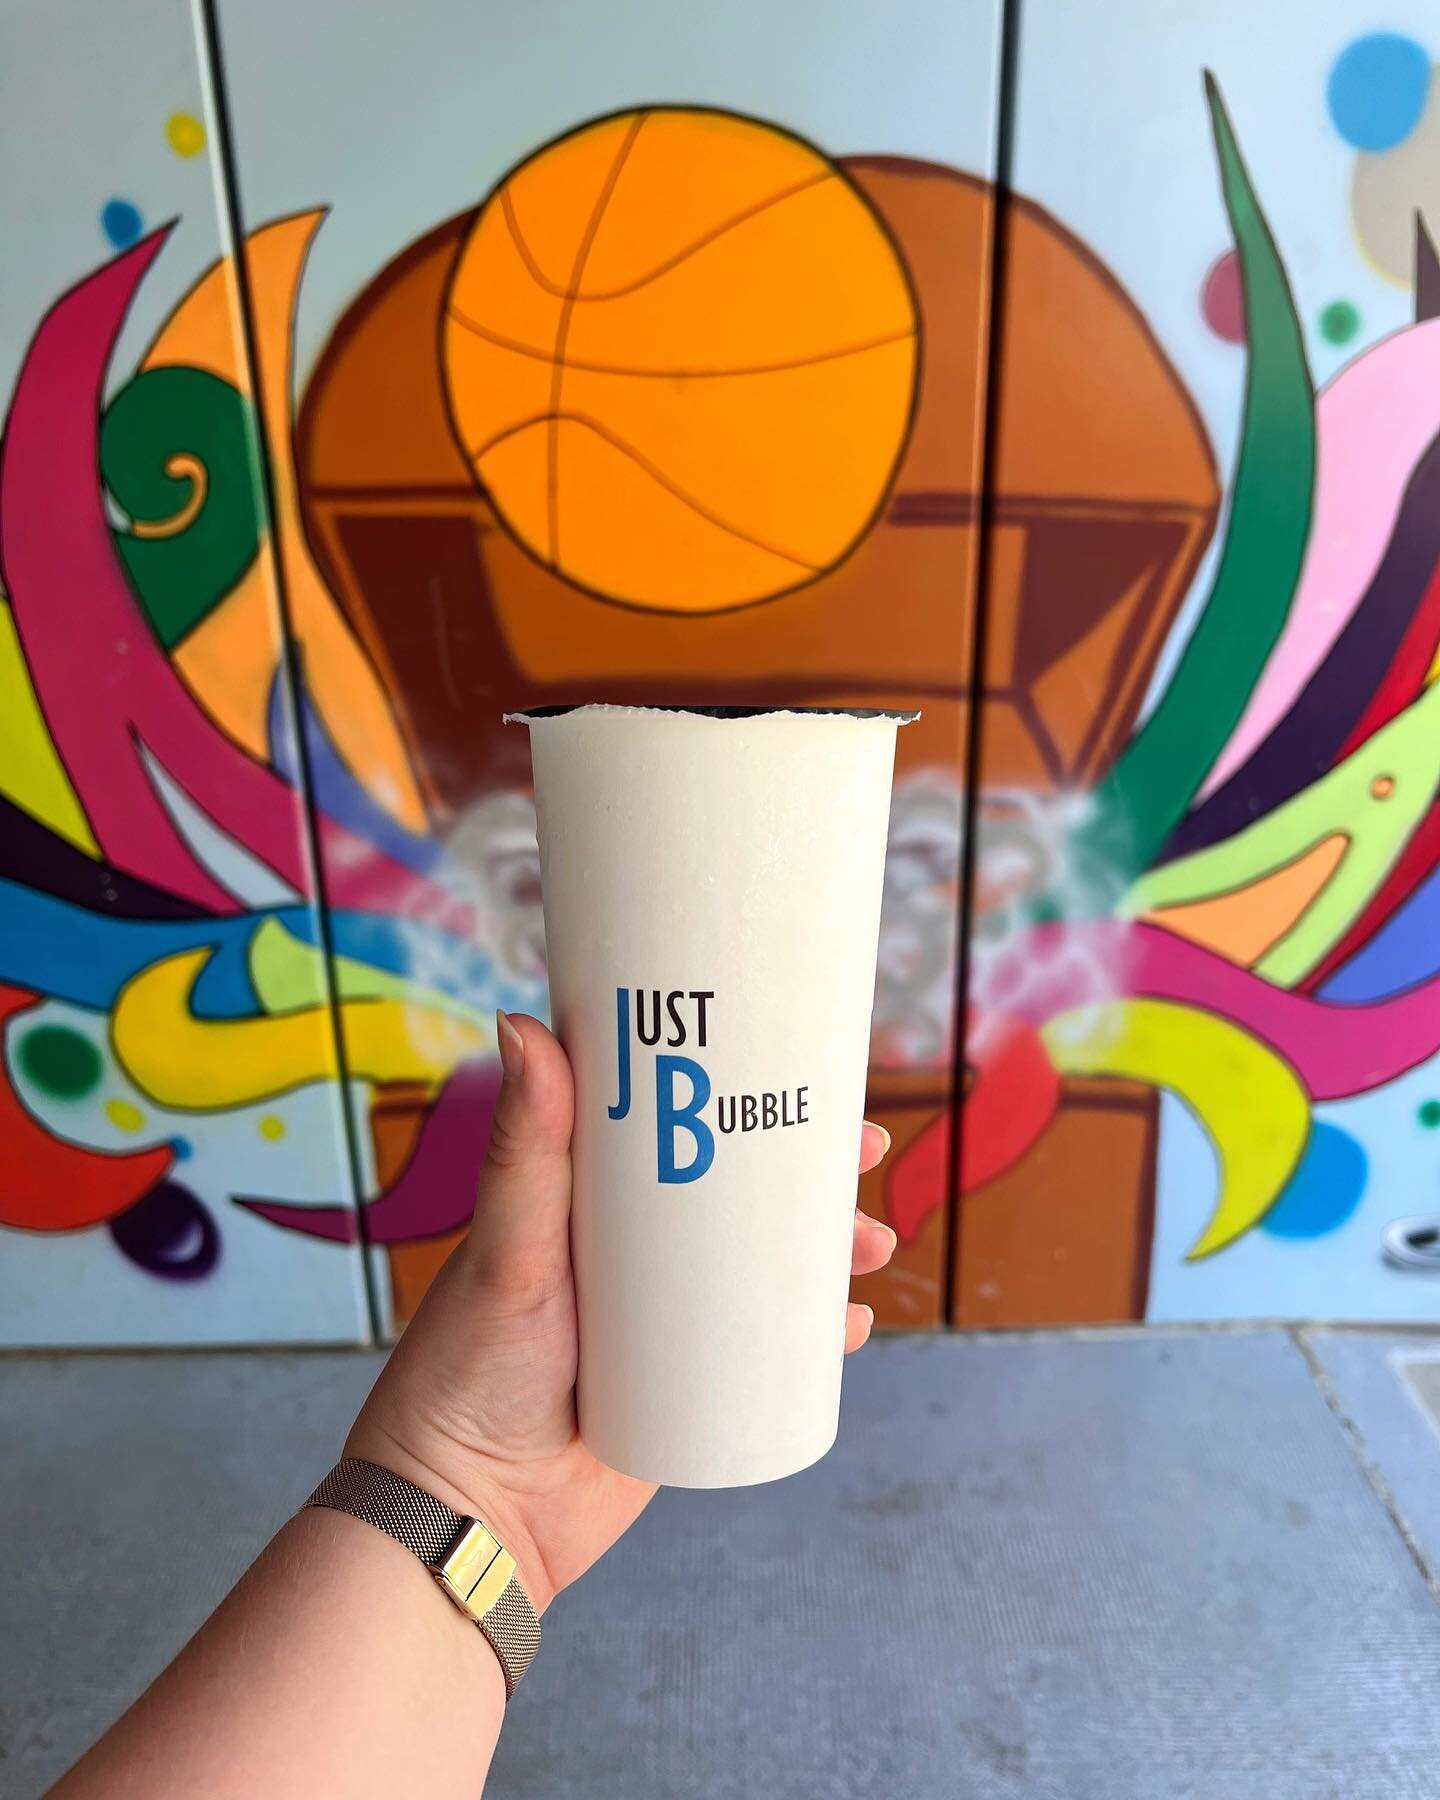 🏀Post Game Bubbles🏀

The perfect drink to cool down after a sporty afternoon, don&rsquo;t you think ? 

P.S. How cool is this street art in Charmilles?
.
.
La boisson parfaite pour se rafra&icirc;chir apr&egrave;s un apr&egrave;s-midi sportif. Vous